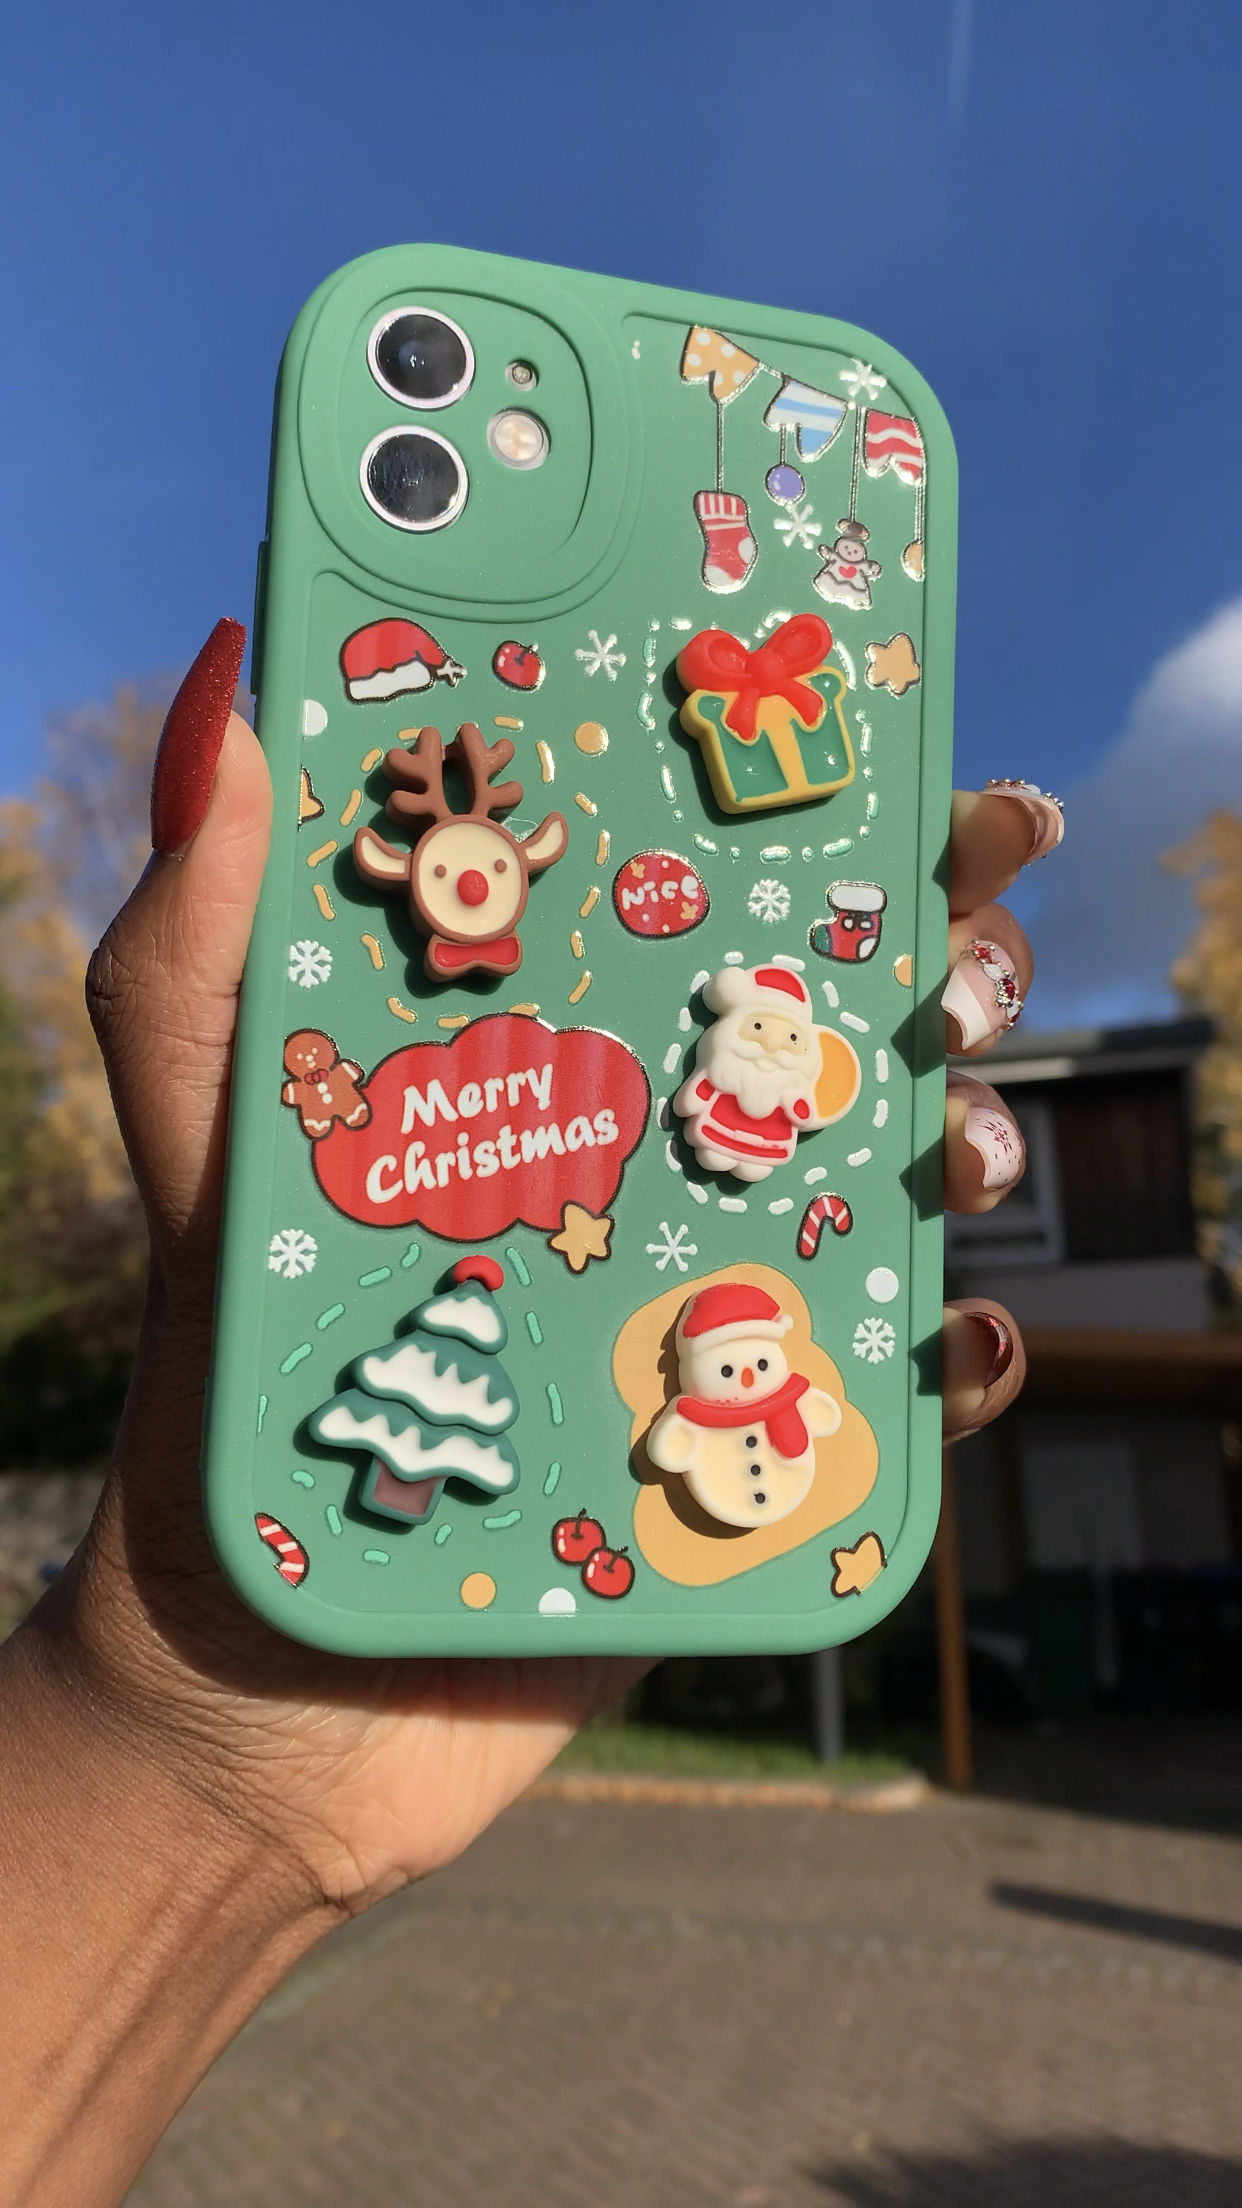 CHRISTMAS CHRONICLES IPHONE CASE ($27)